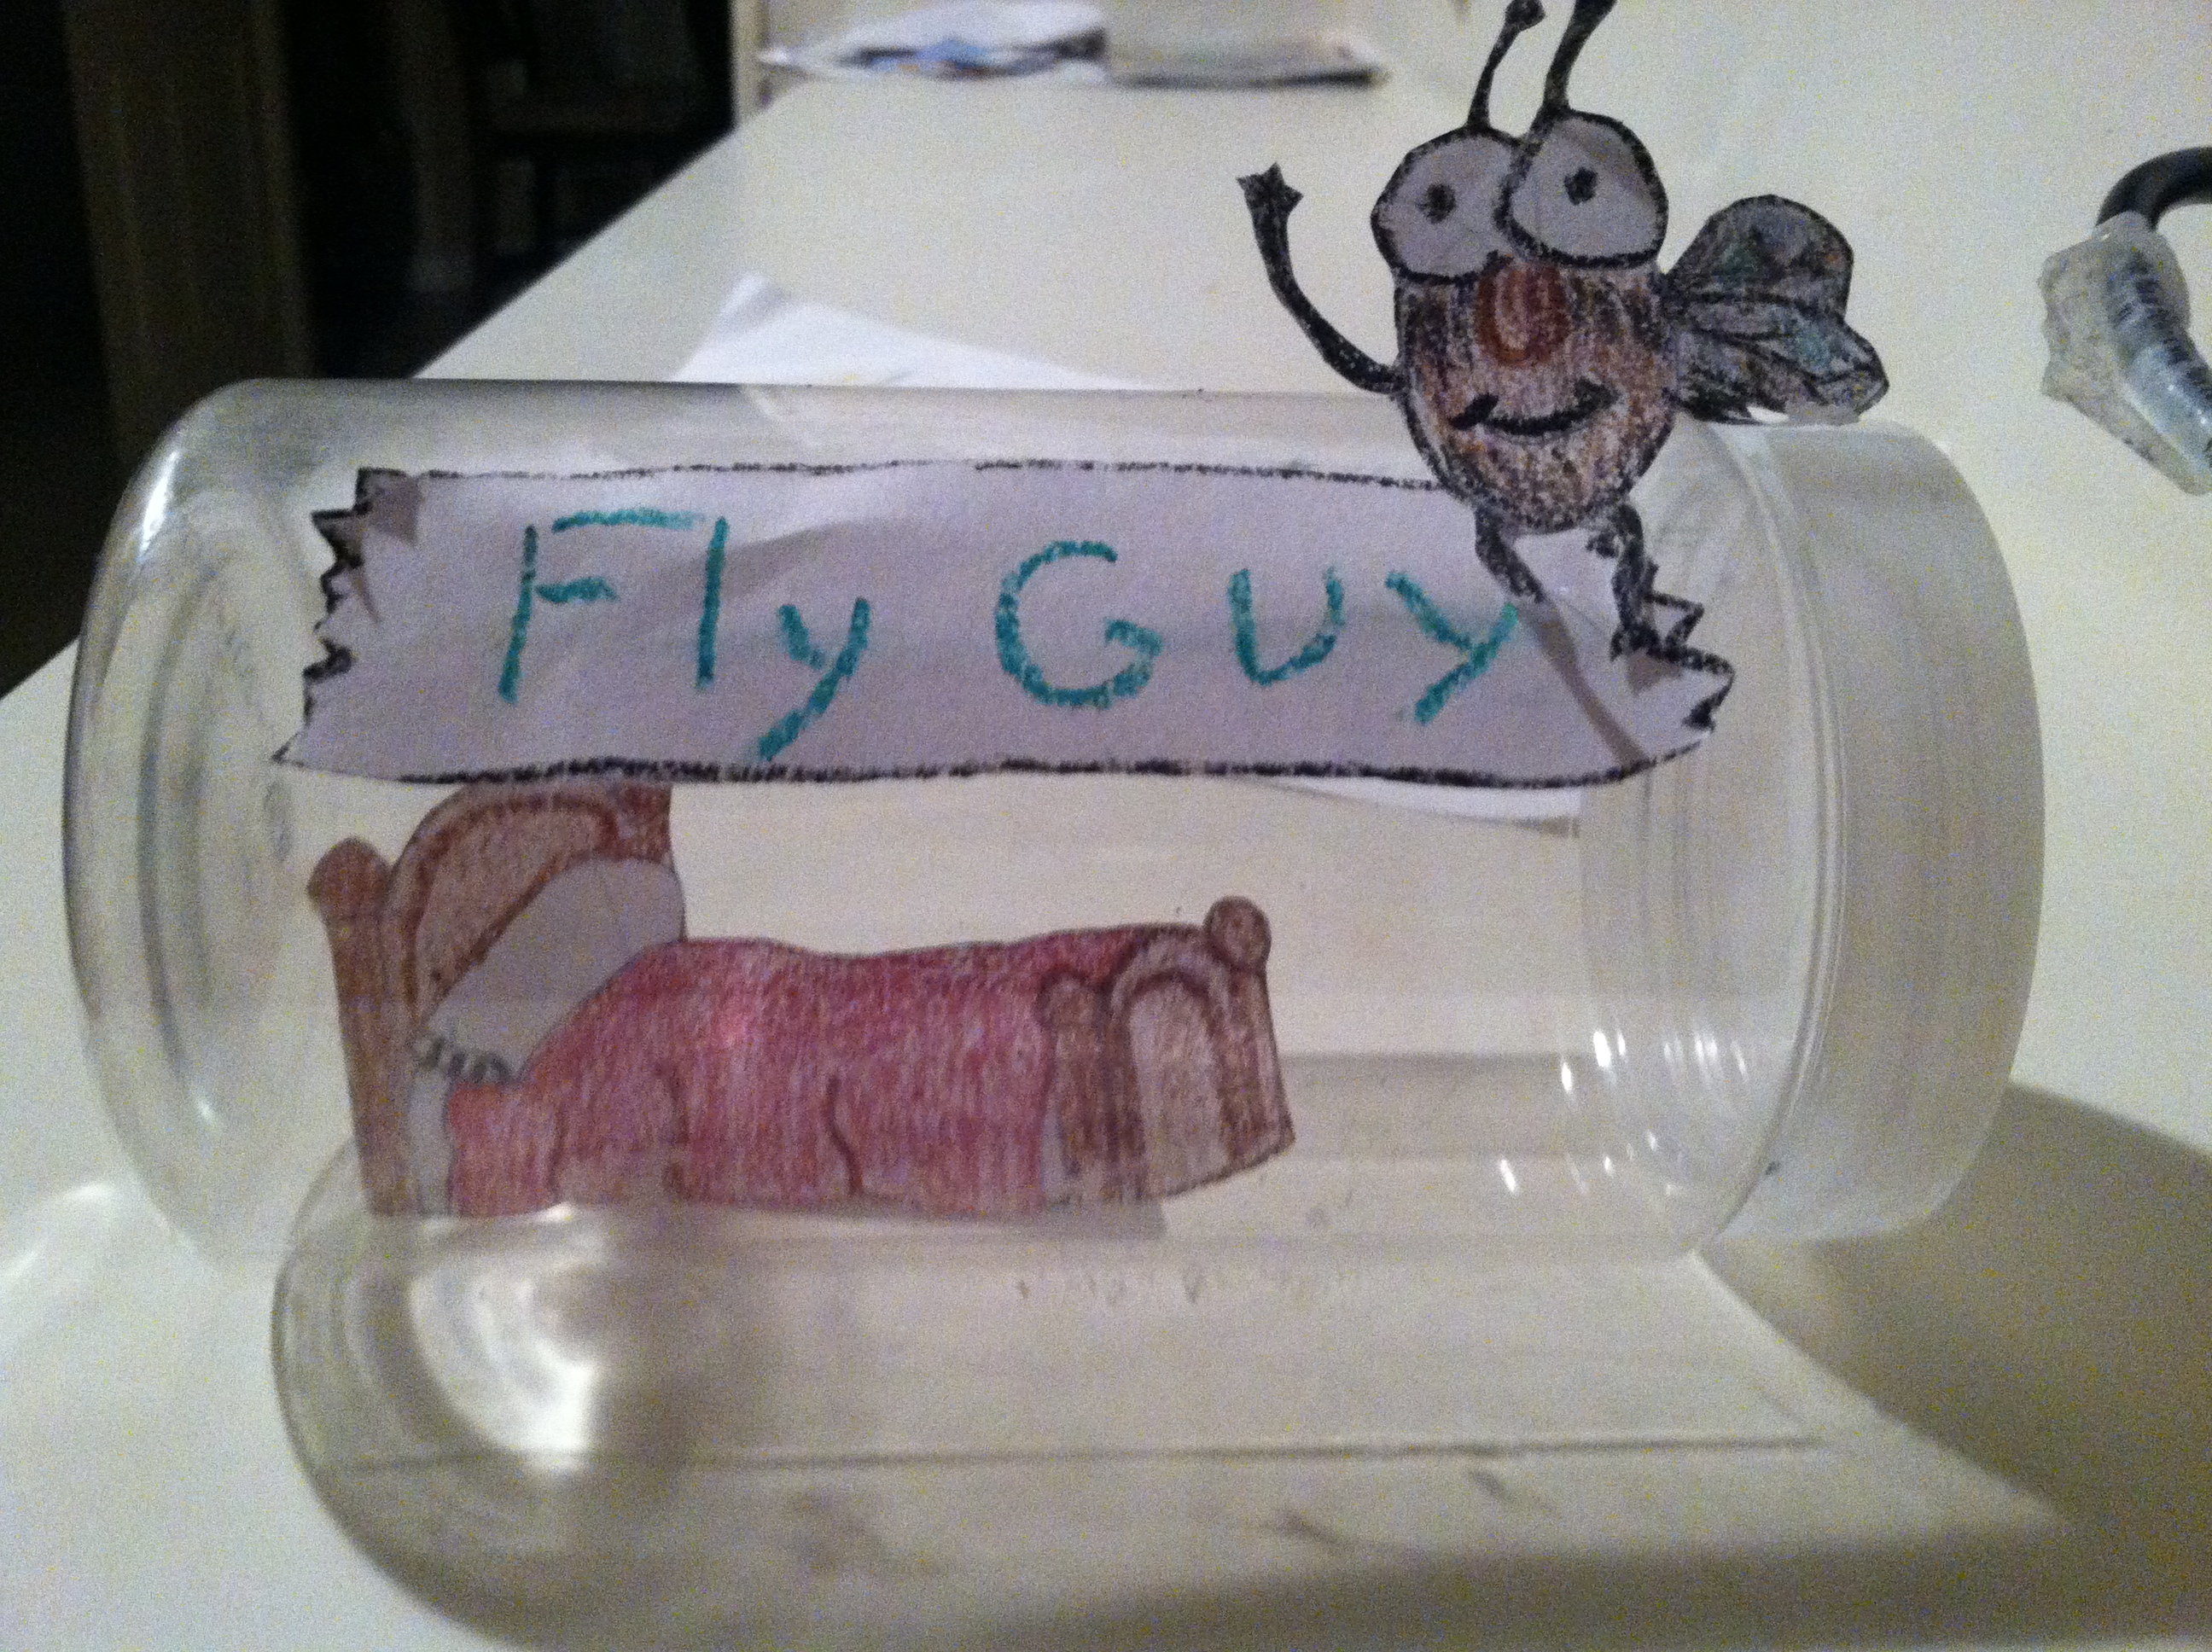 Close-up of the Fly Guy jar